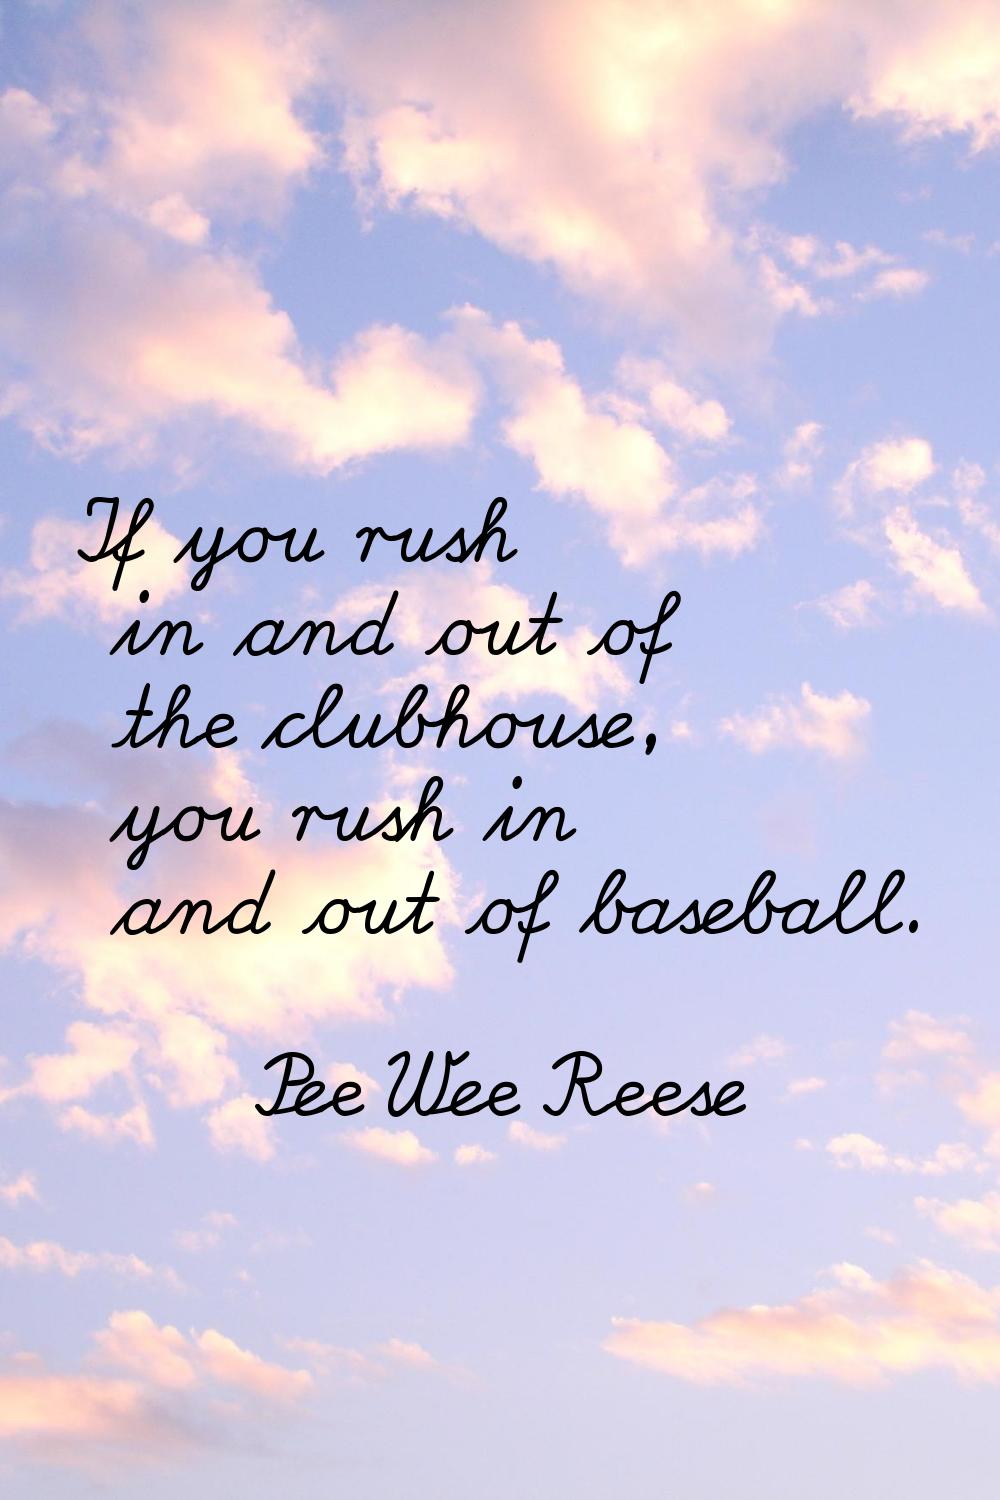 If you rush in and out of the clubhouse, you rush in and out of baseball.